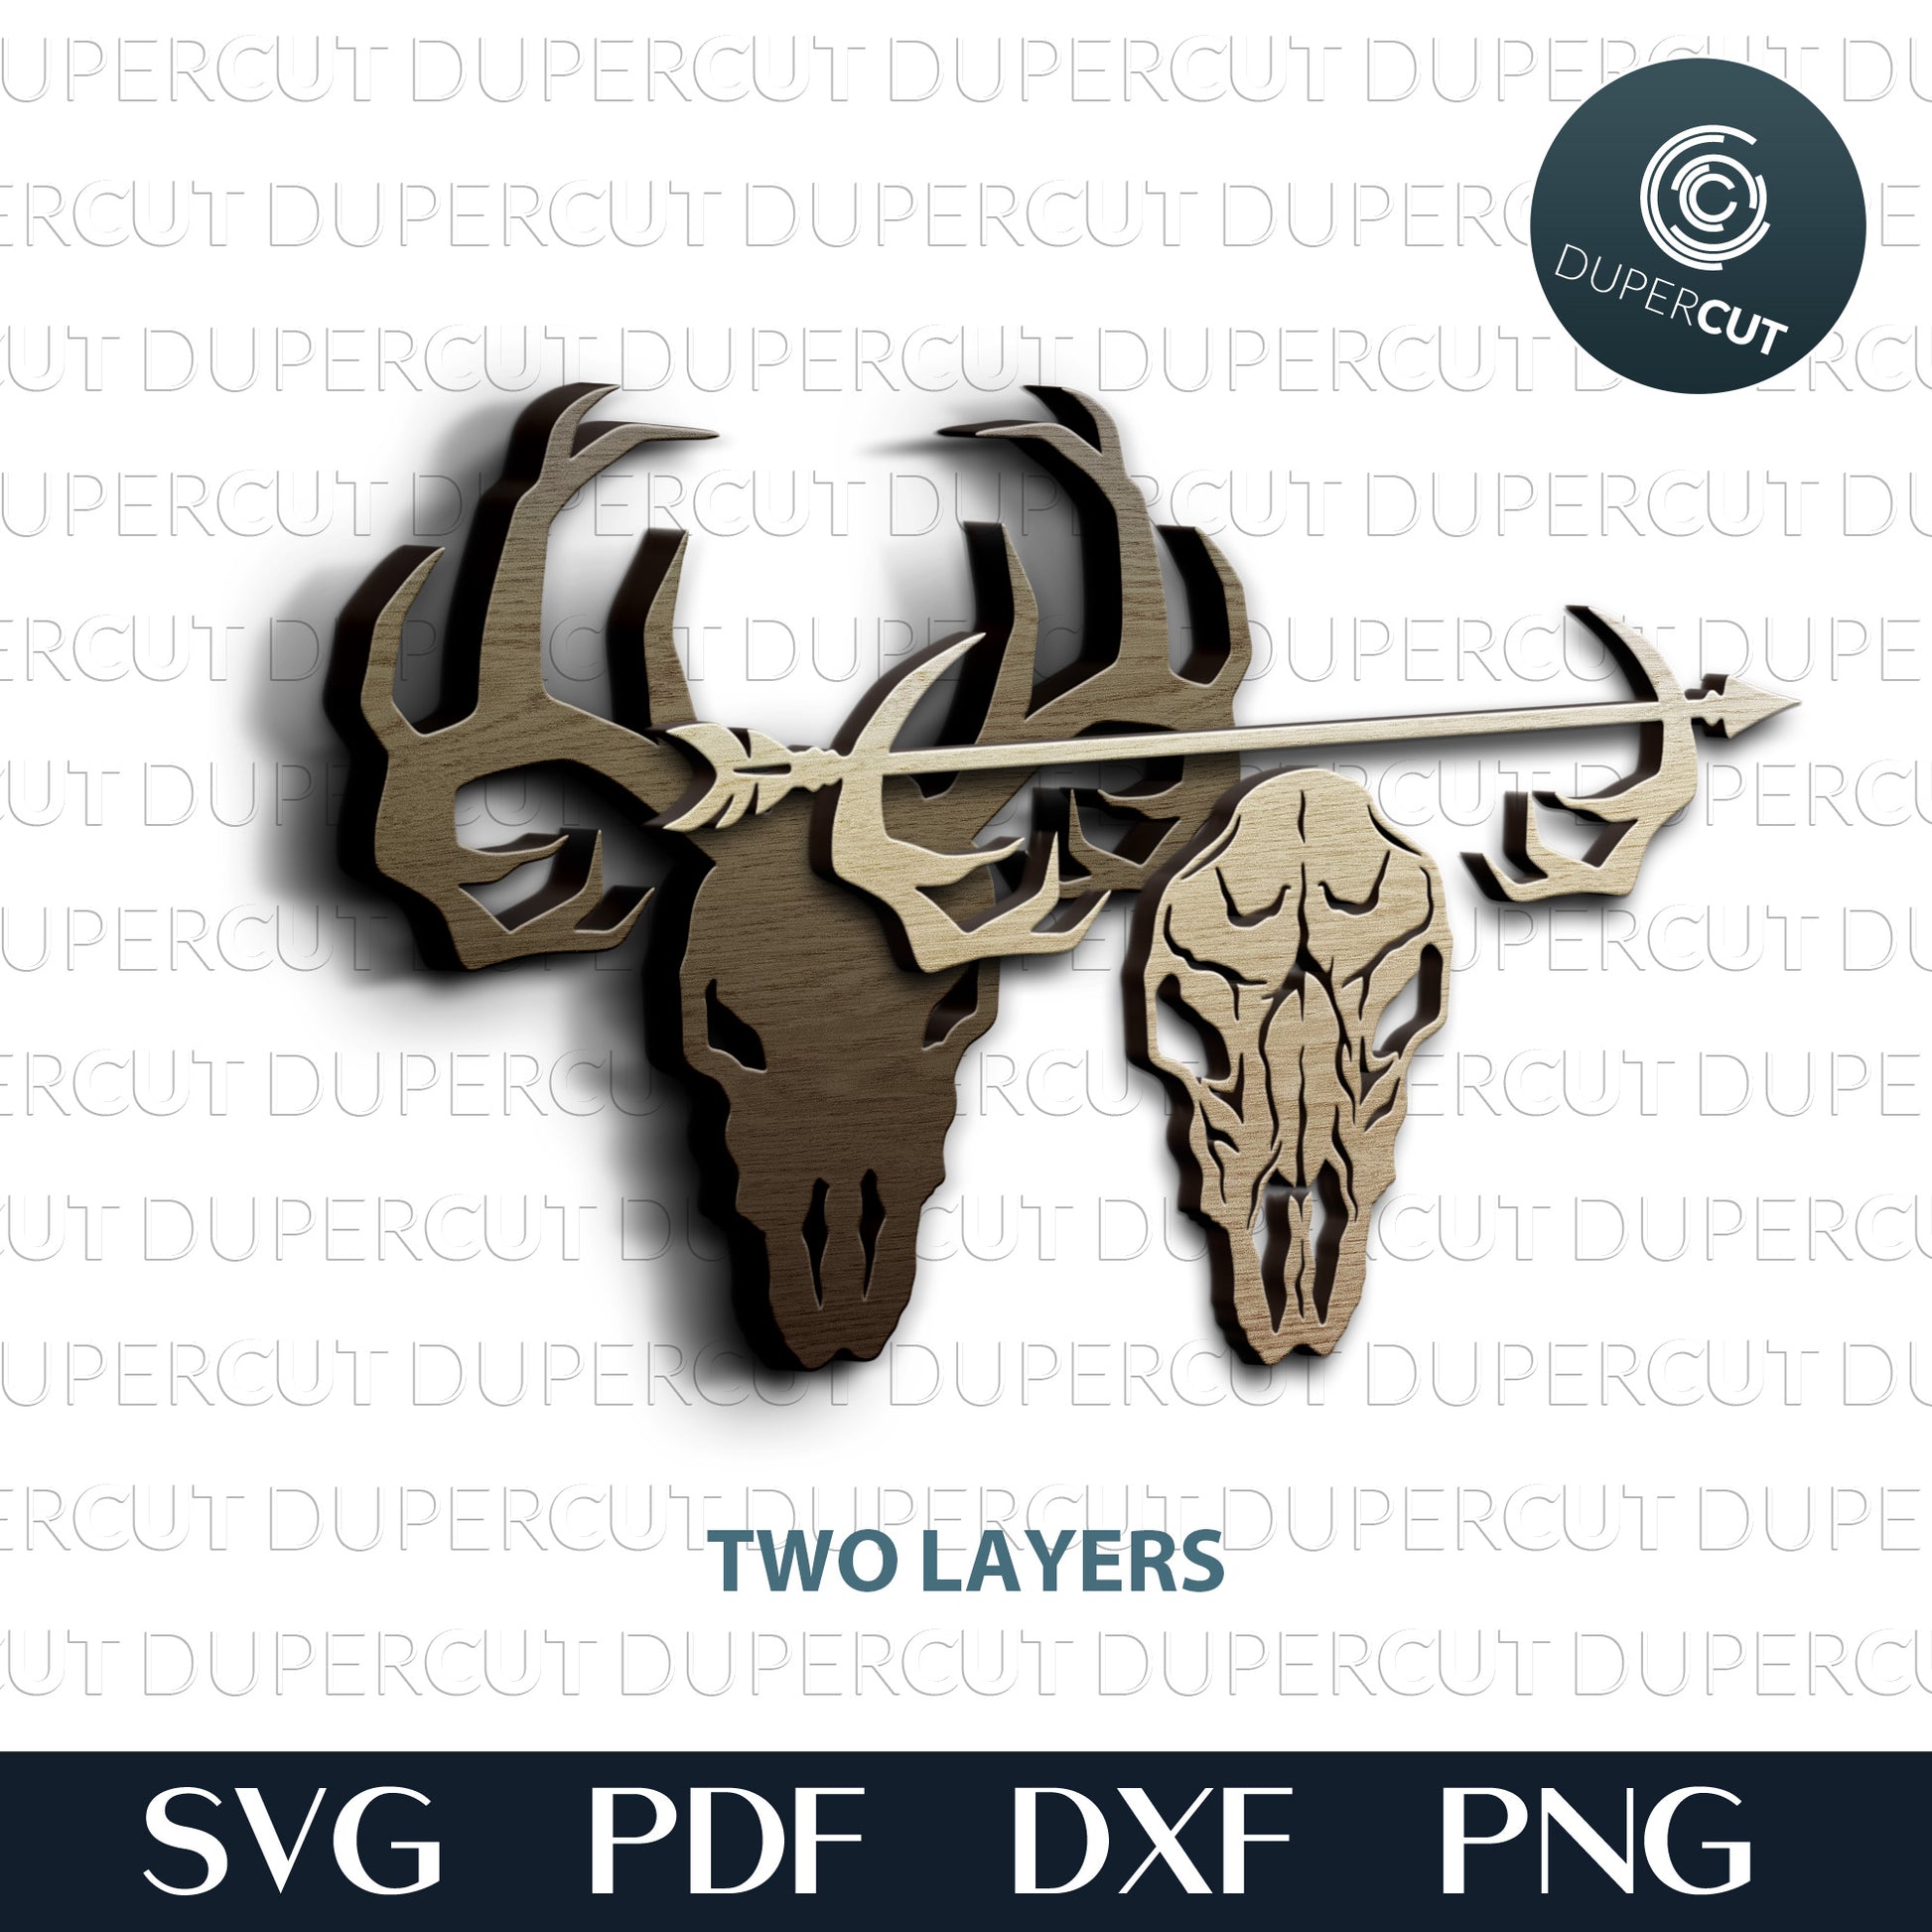 Deer Skull with arrow and antlers - vector layered cutting files SVG PDF DXF template for Glowforge, Cricut, Silhouette Cameo, CNC plasma machines